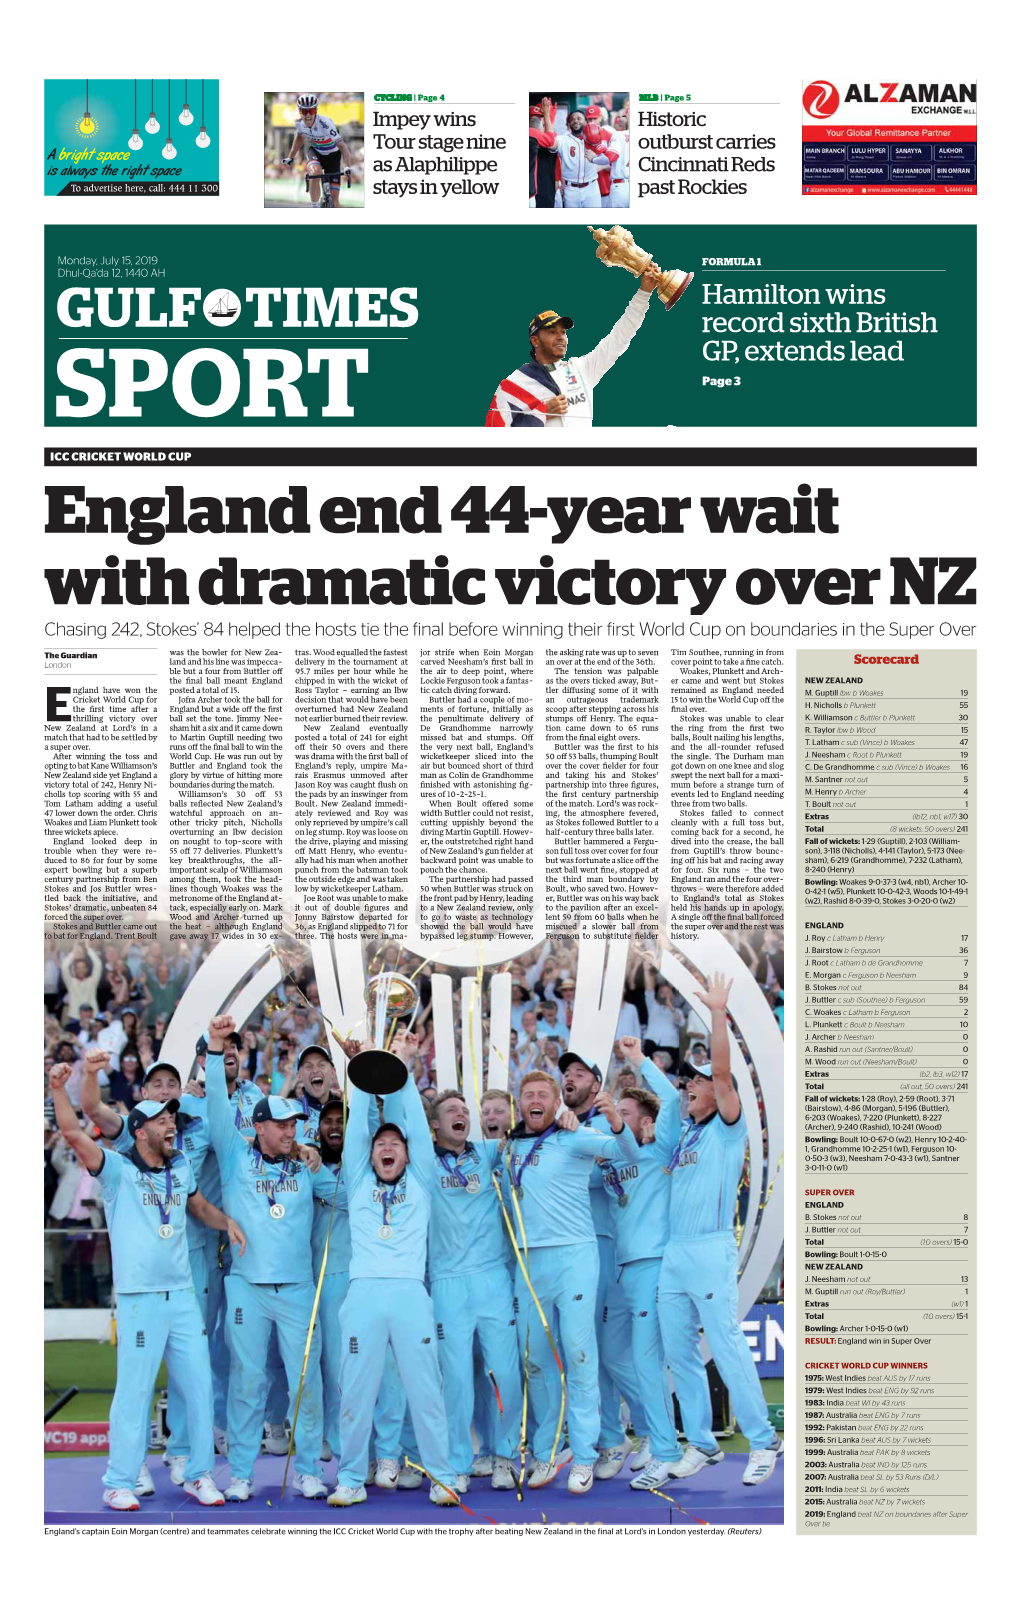 England End 44-Year Wait with Dramatic Victory Over NZ